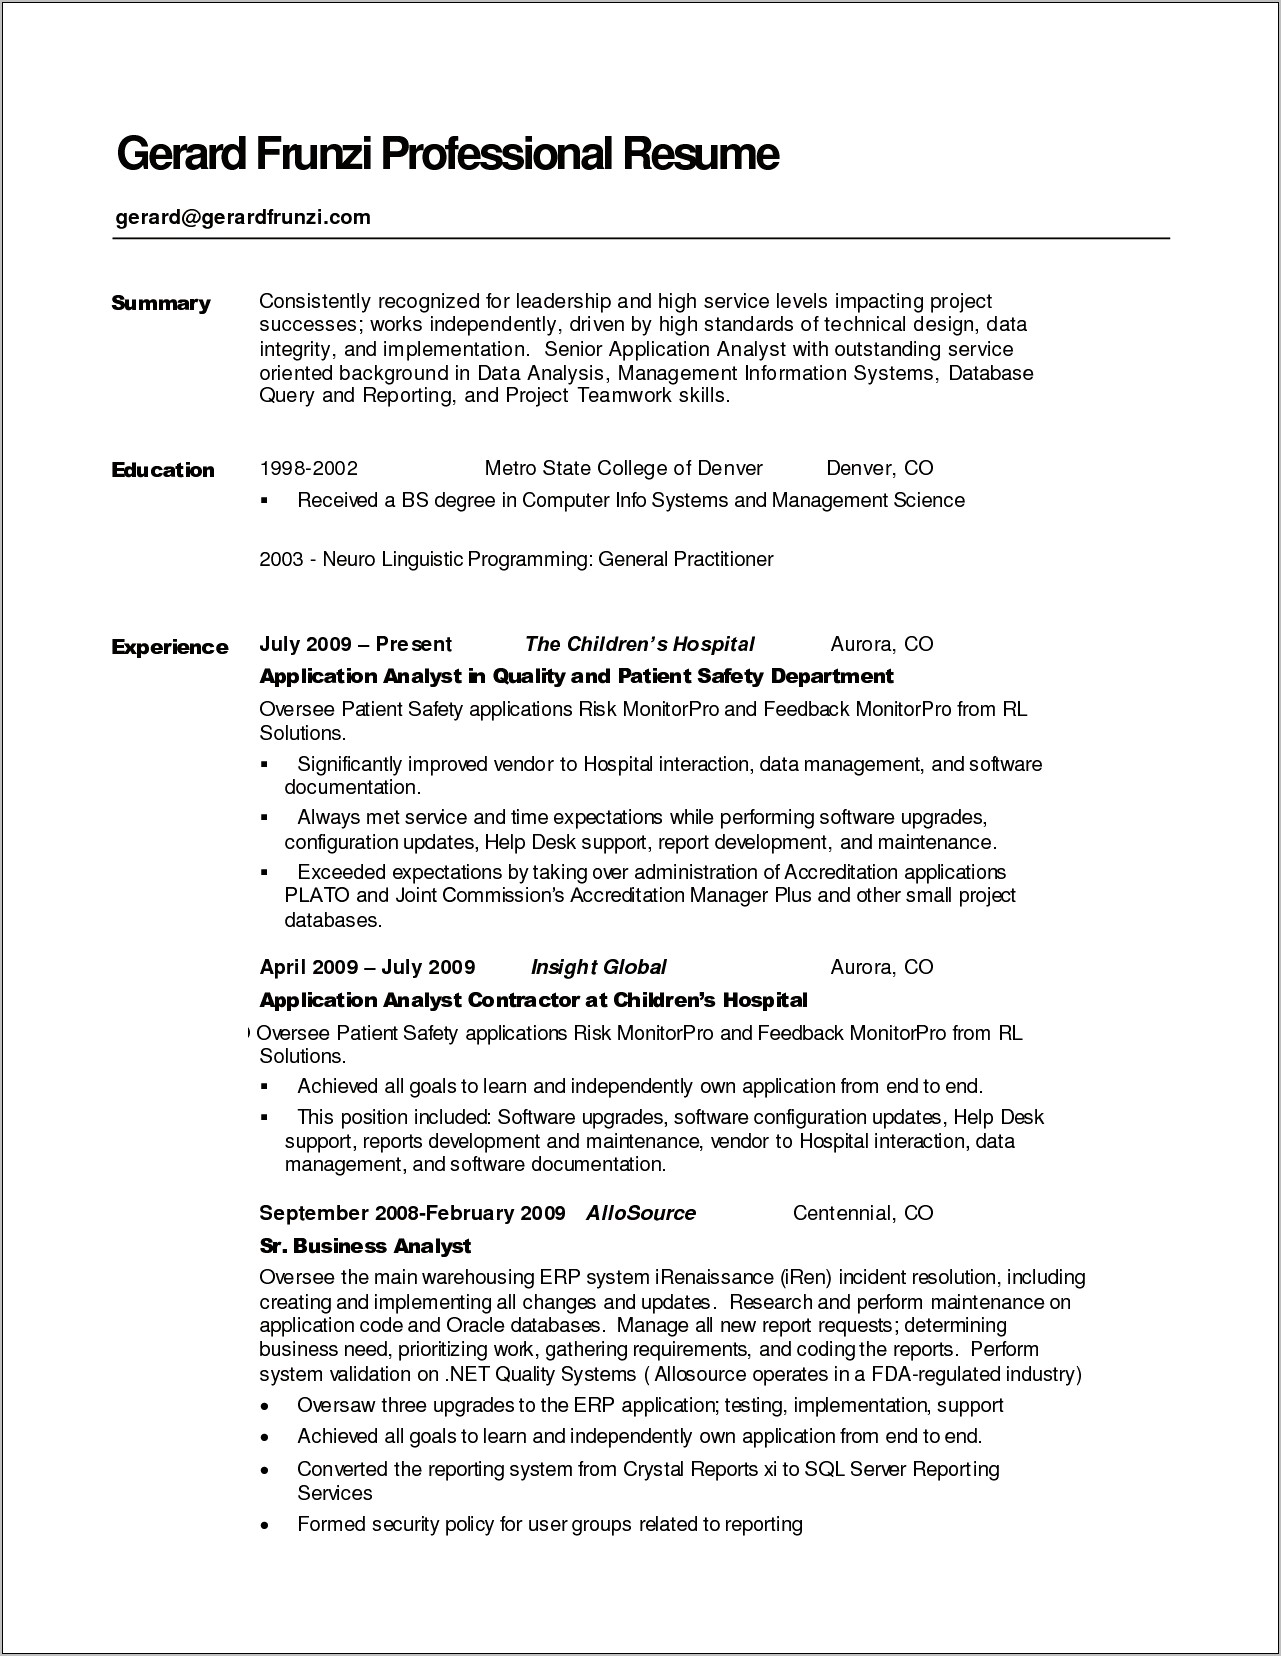 Examples Of Professional Summaries For A Resume